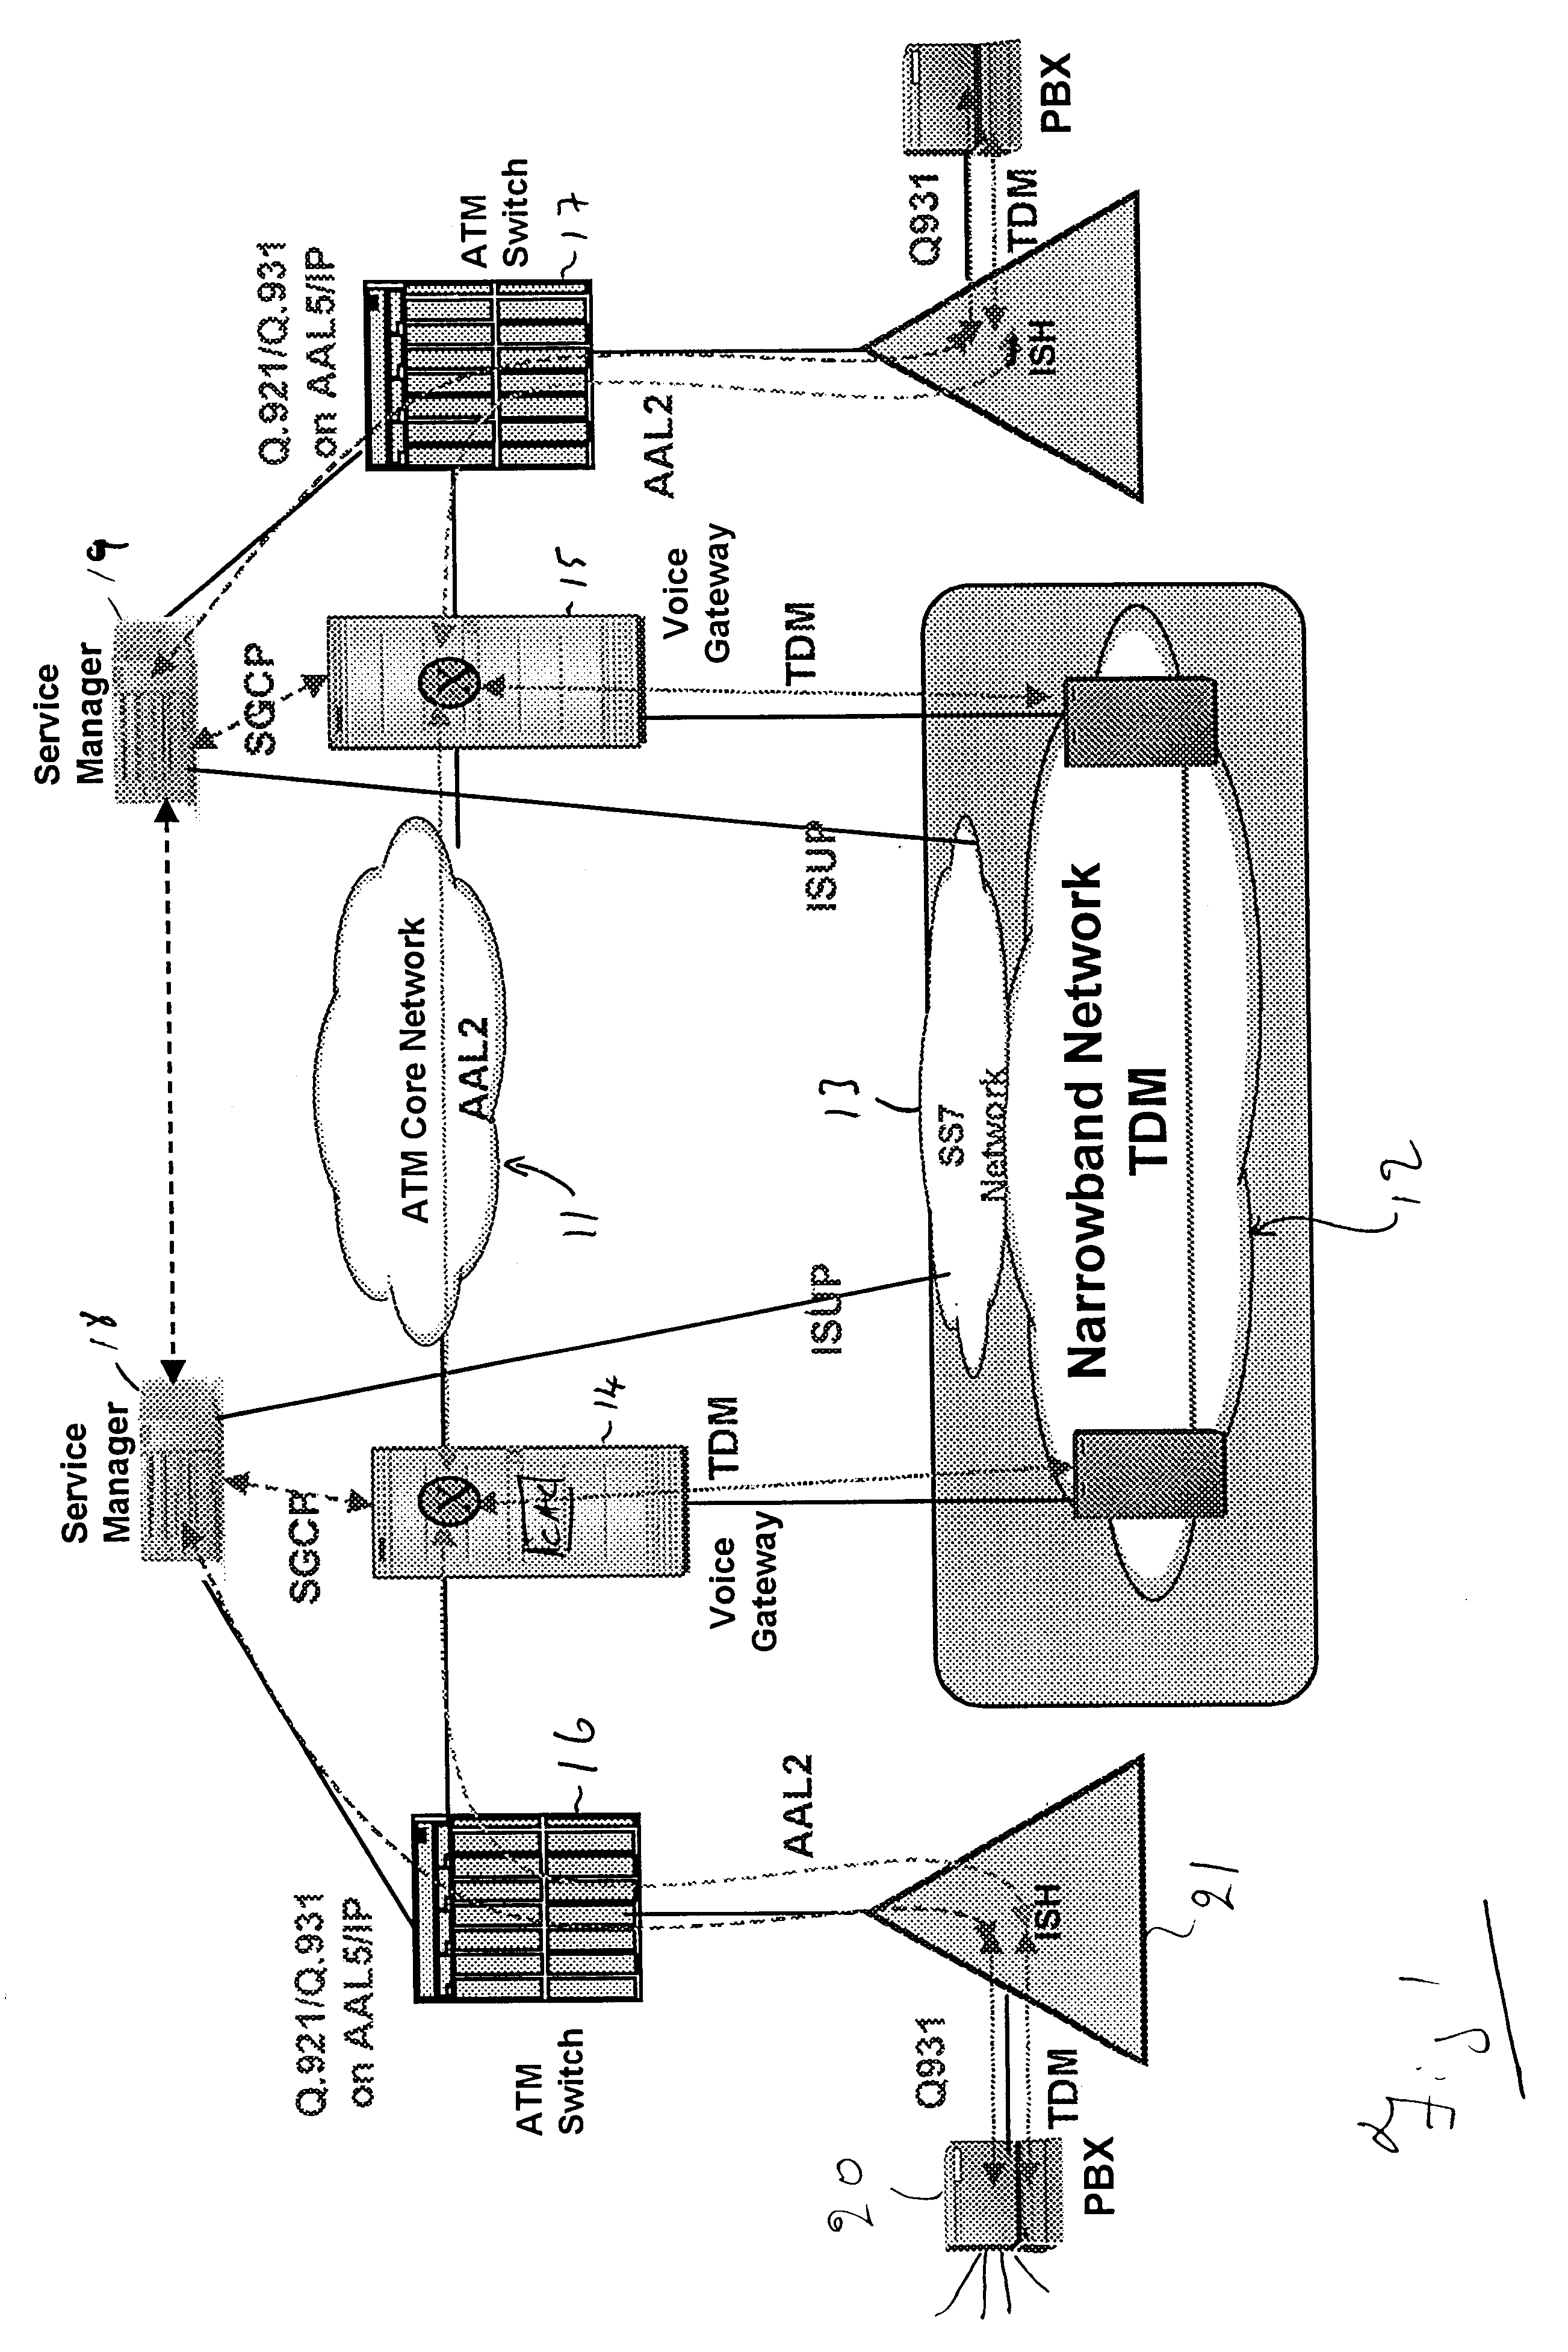 Providing connection admission control in a communications network